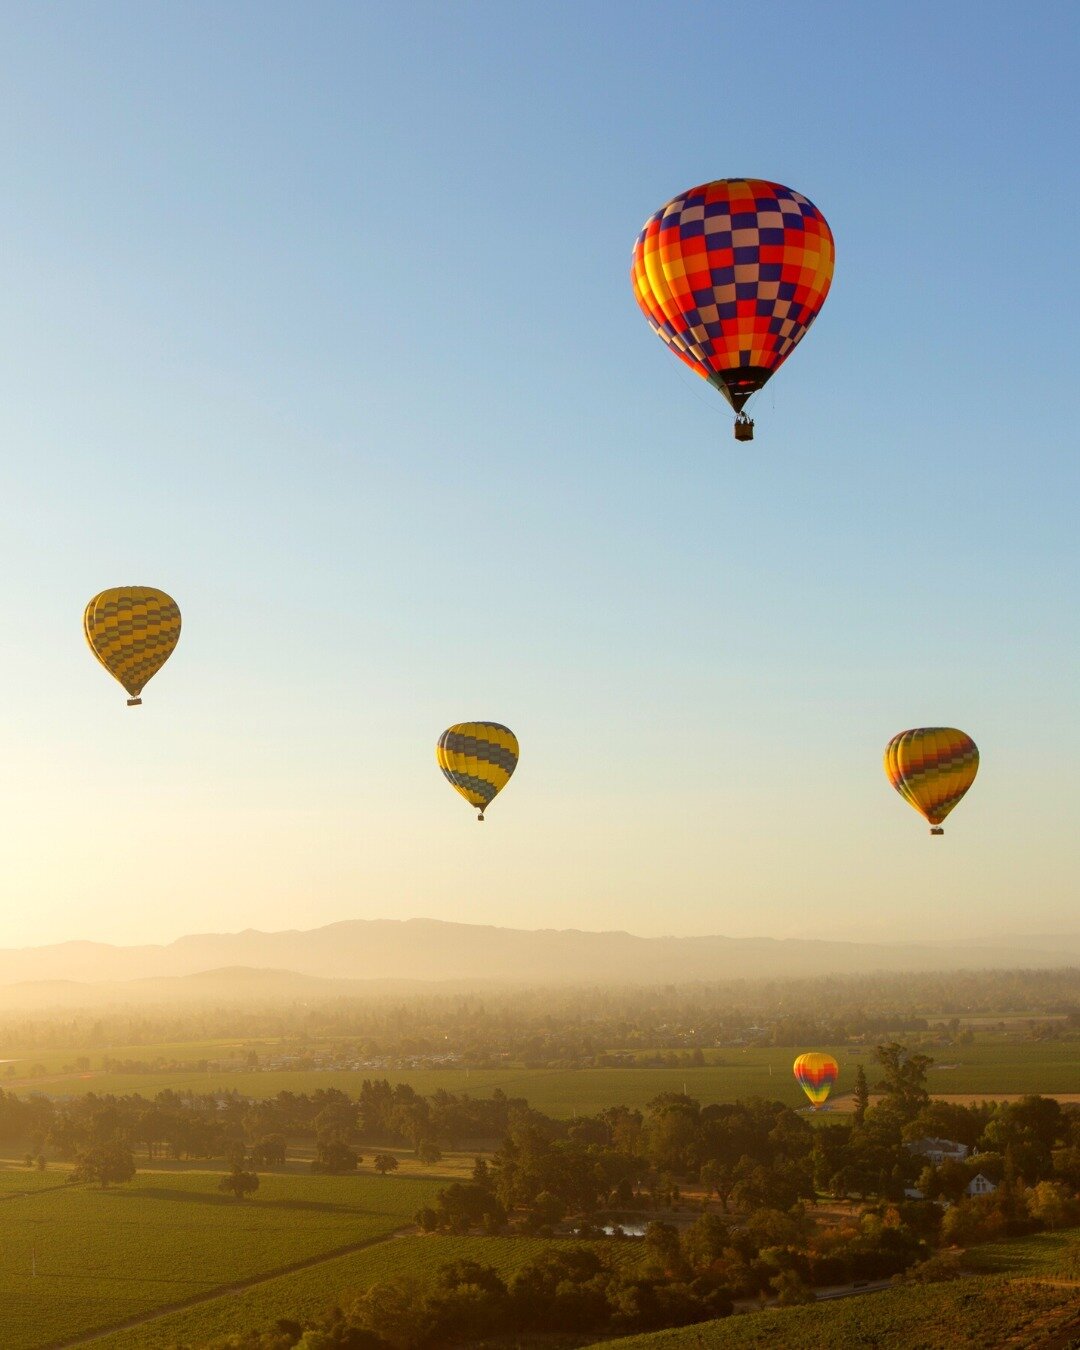 Up, up, and away! Taking the ultimate #NapaValley adventure with a hot air balloon ride soaring above the vineyards, capturing epic views, and making memories that will last a lifetime. #BalloonOverNapa #SkyHighFun #UnforgettableViews #CulturedVine #